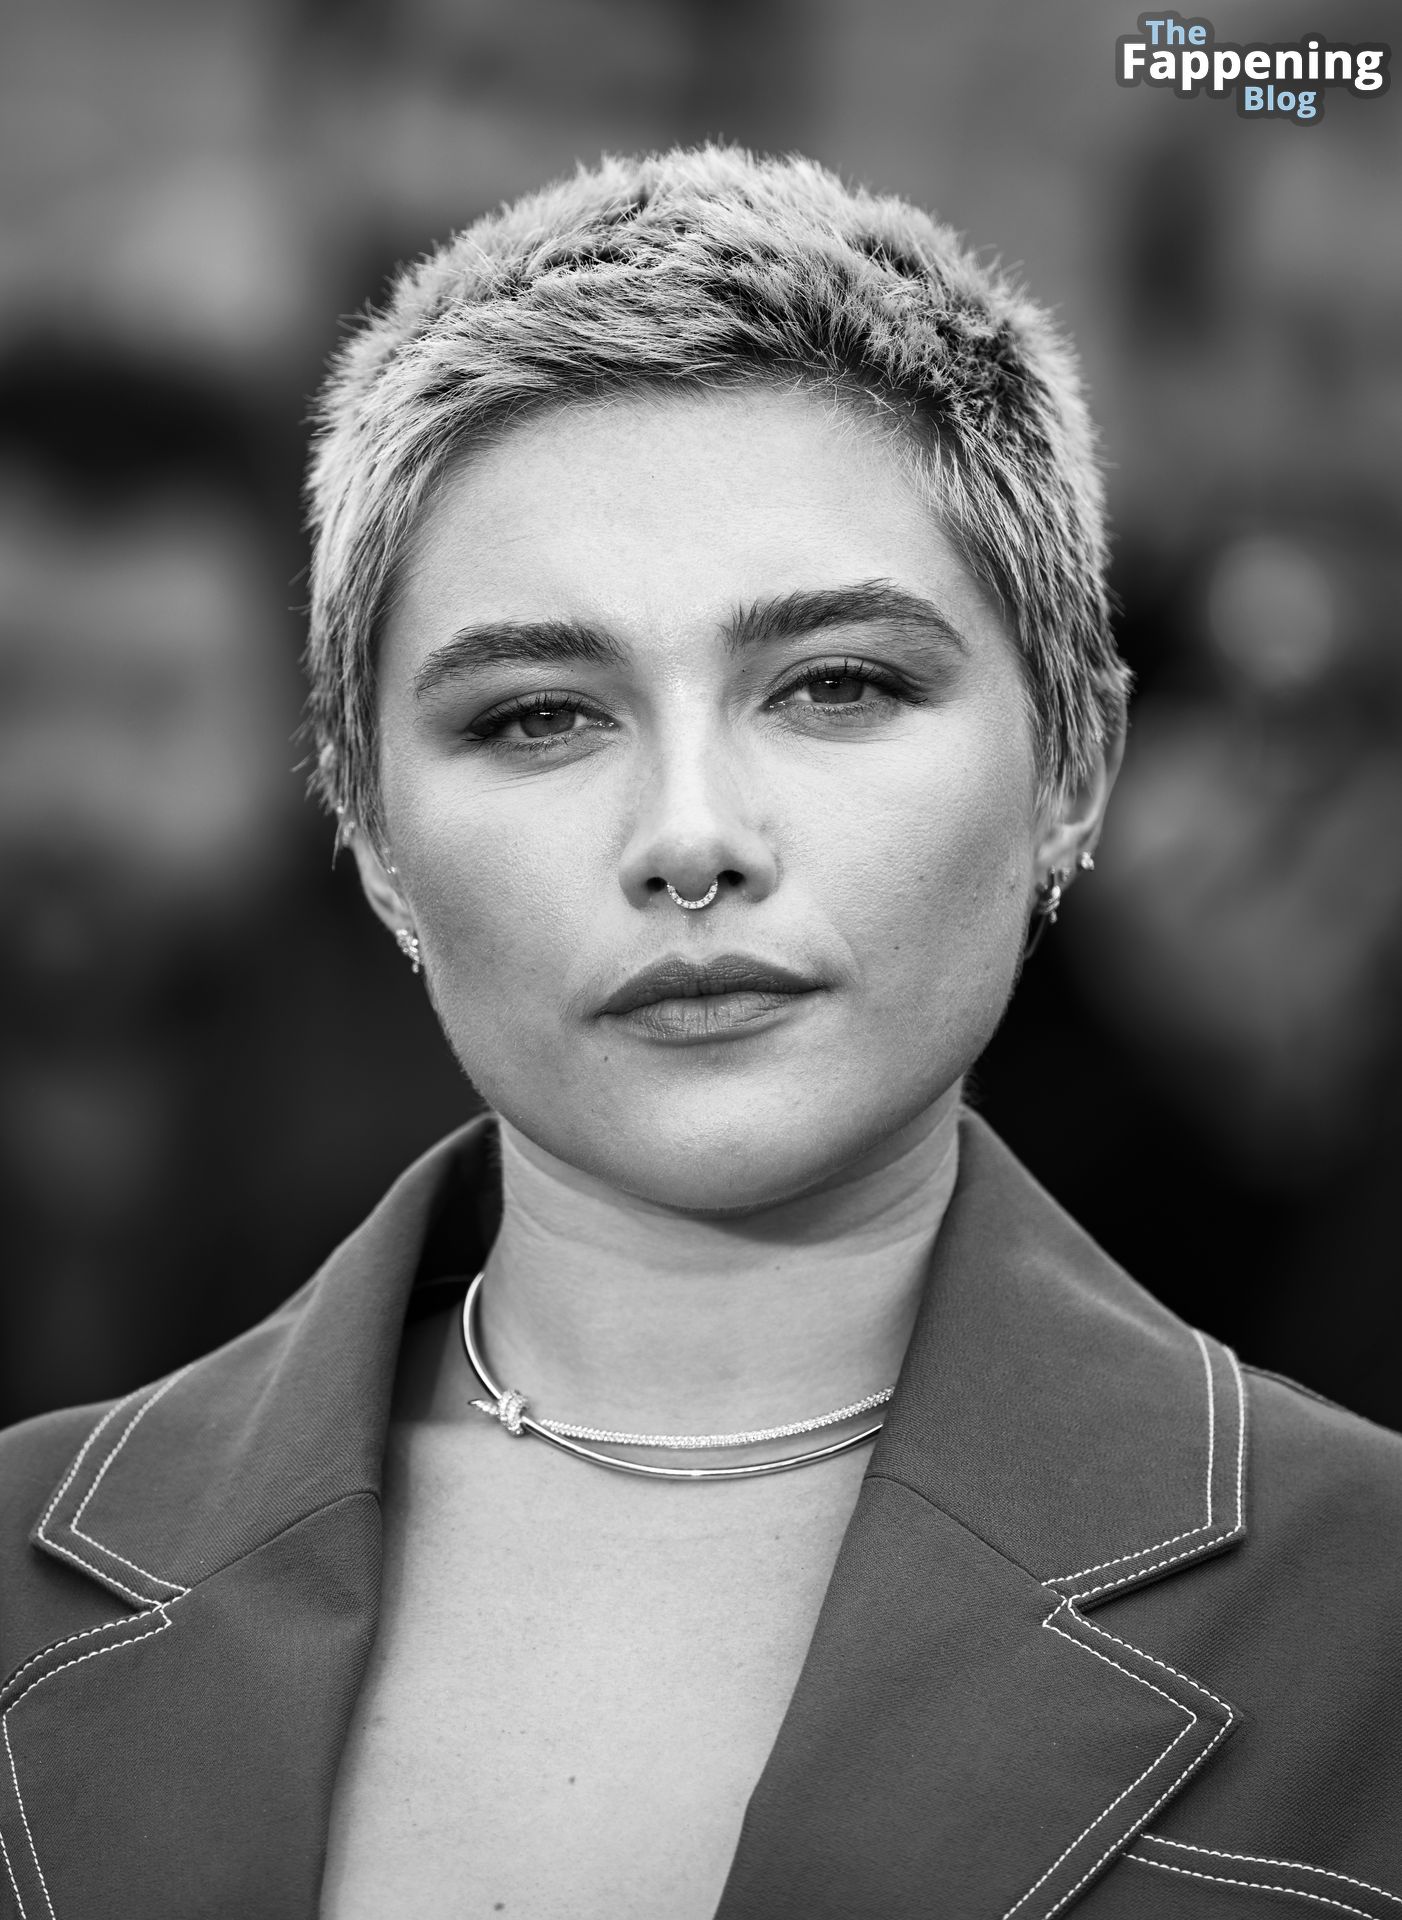 Florence-Pugh-Sexy-The-Fappening-Blog-28.jpg